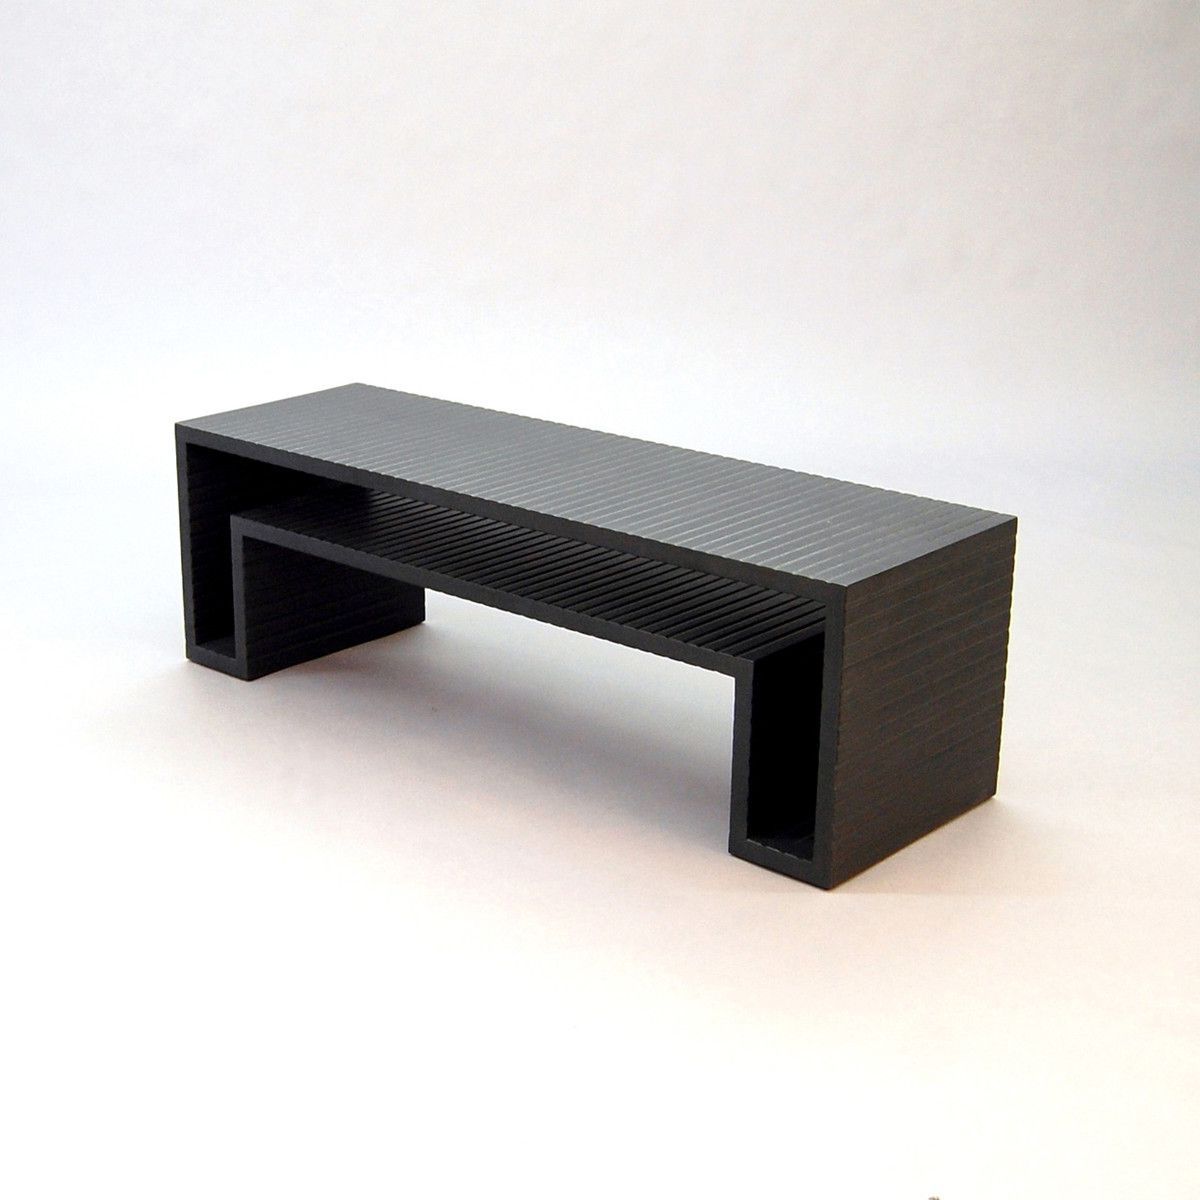 Geometric Furniture, L Shaped Intended For L Shaped Coffee Tables (View 11 of 20)